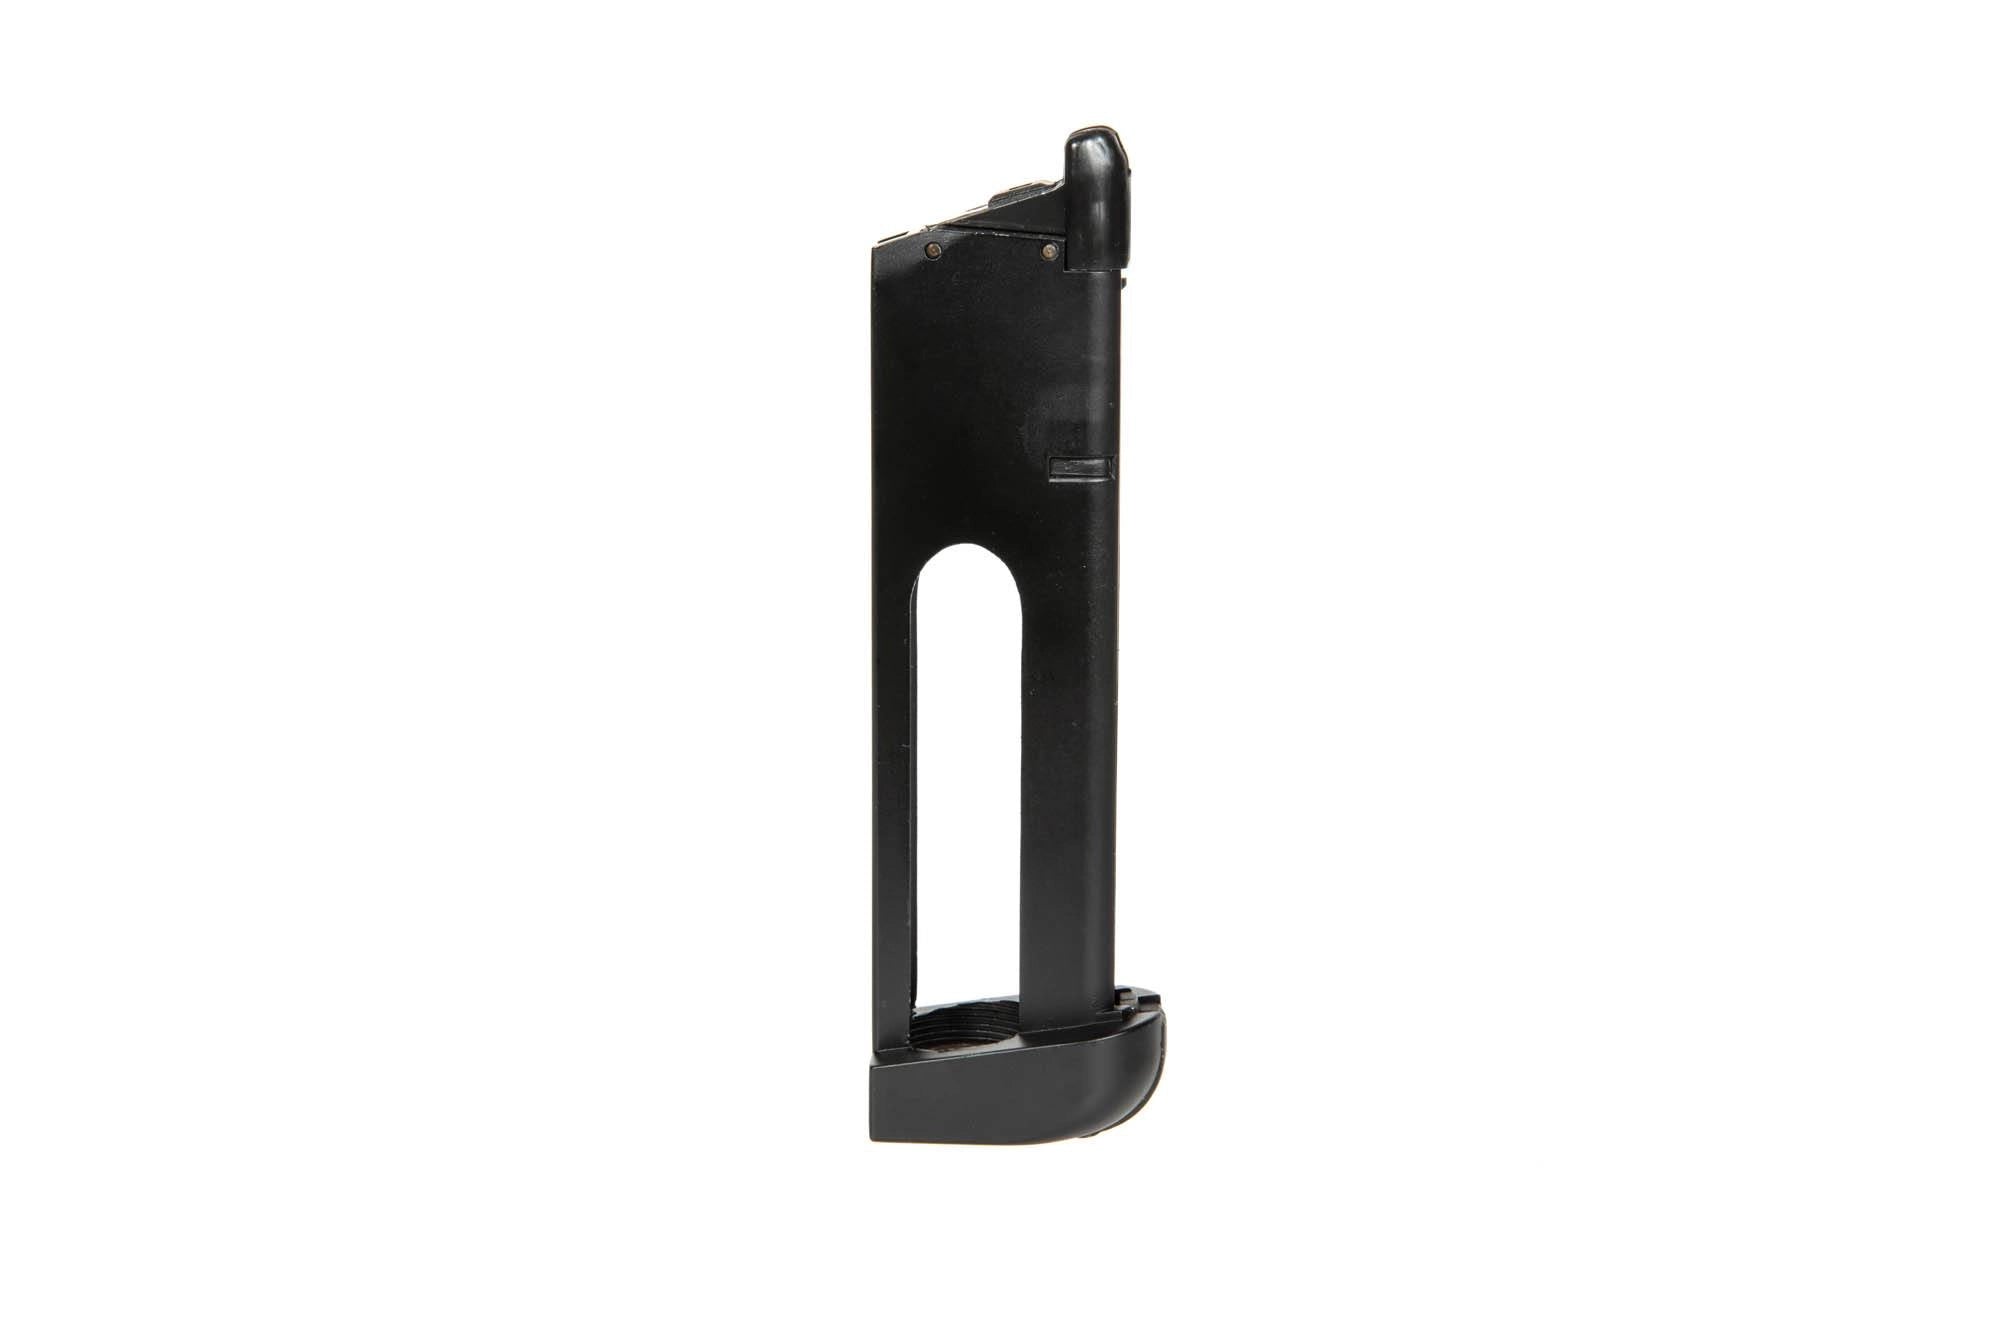 CO2 27 BB Magazine for Double Bell 823 (M1911) Replicas-2